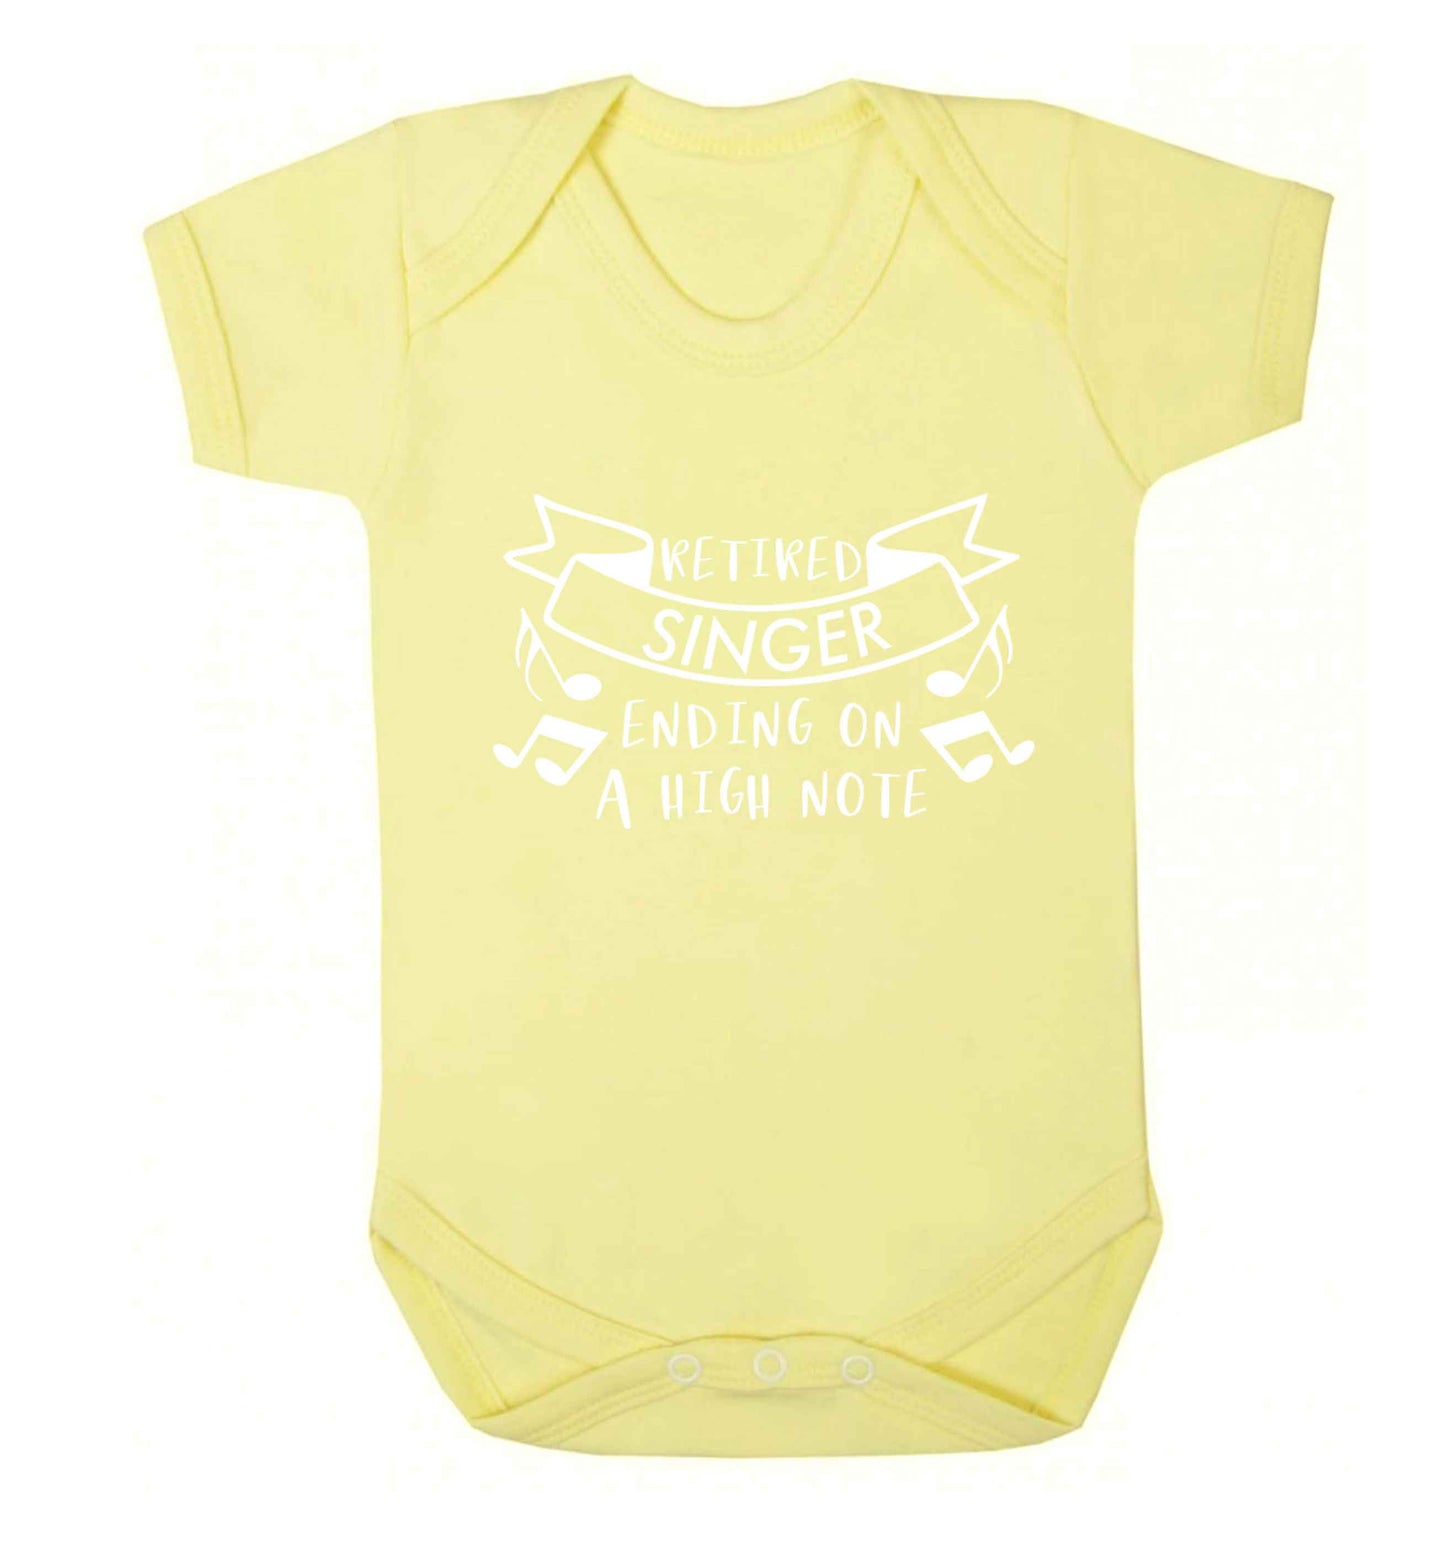 Retired singer ending on a high note Baby Vest pale yellow 18-24 months